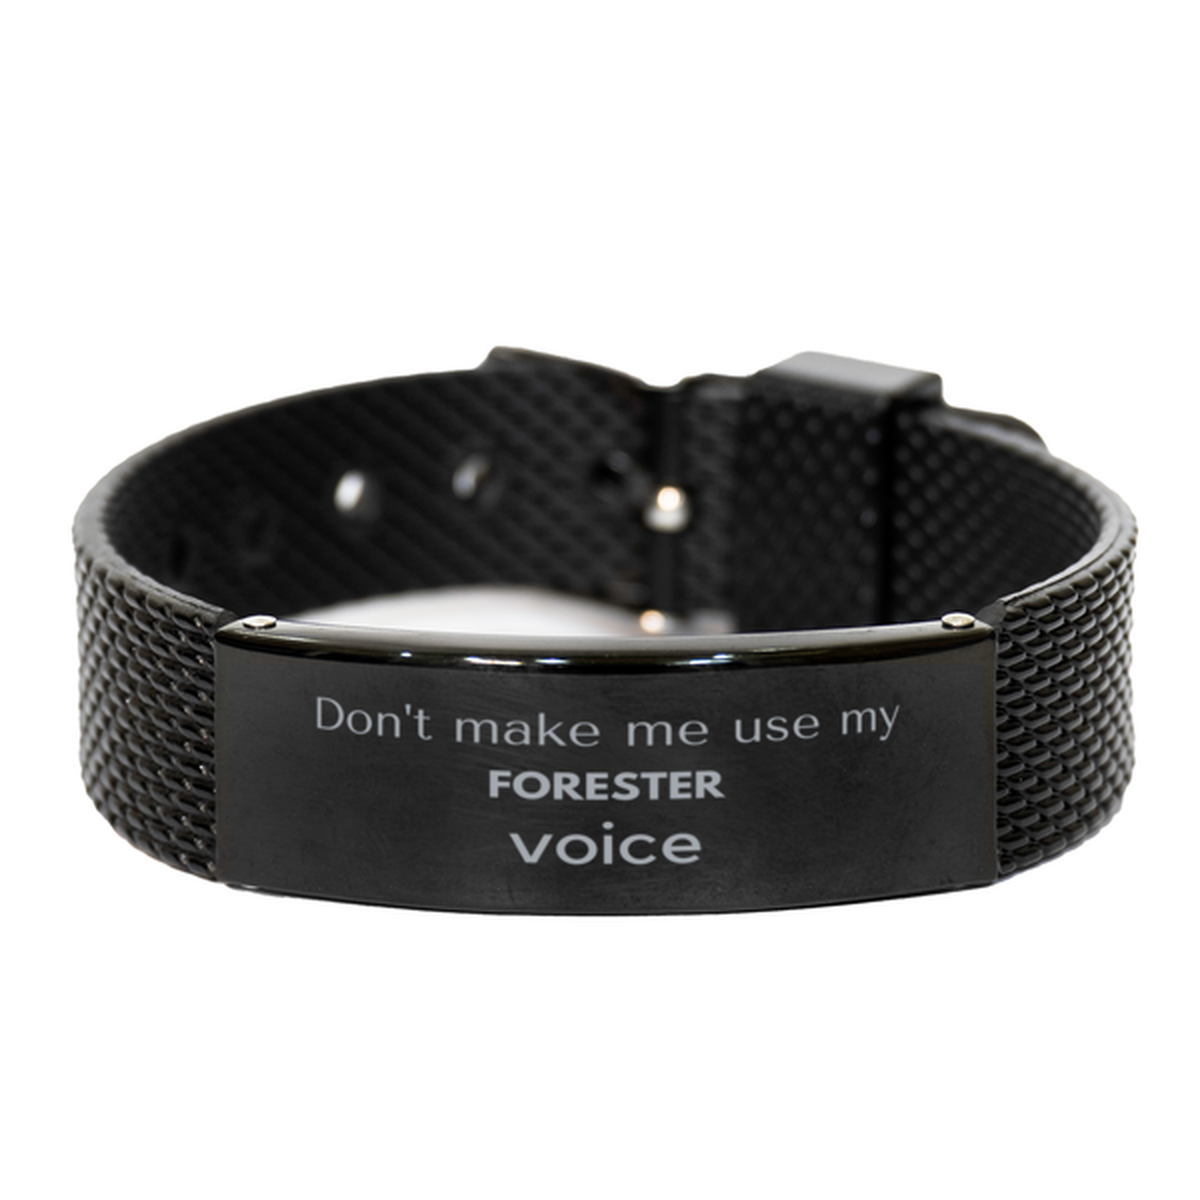 Don't make me use my Forester voice, Sarcasm Forester Gifts, Christmas Forester Black Shark Mesh Bracelet Birthday Unique Gifts For Forester Coworkers, Men, Women, Colleague, Friends